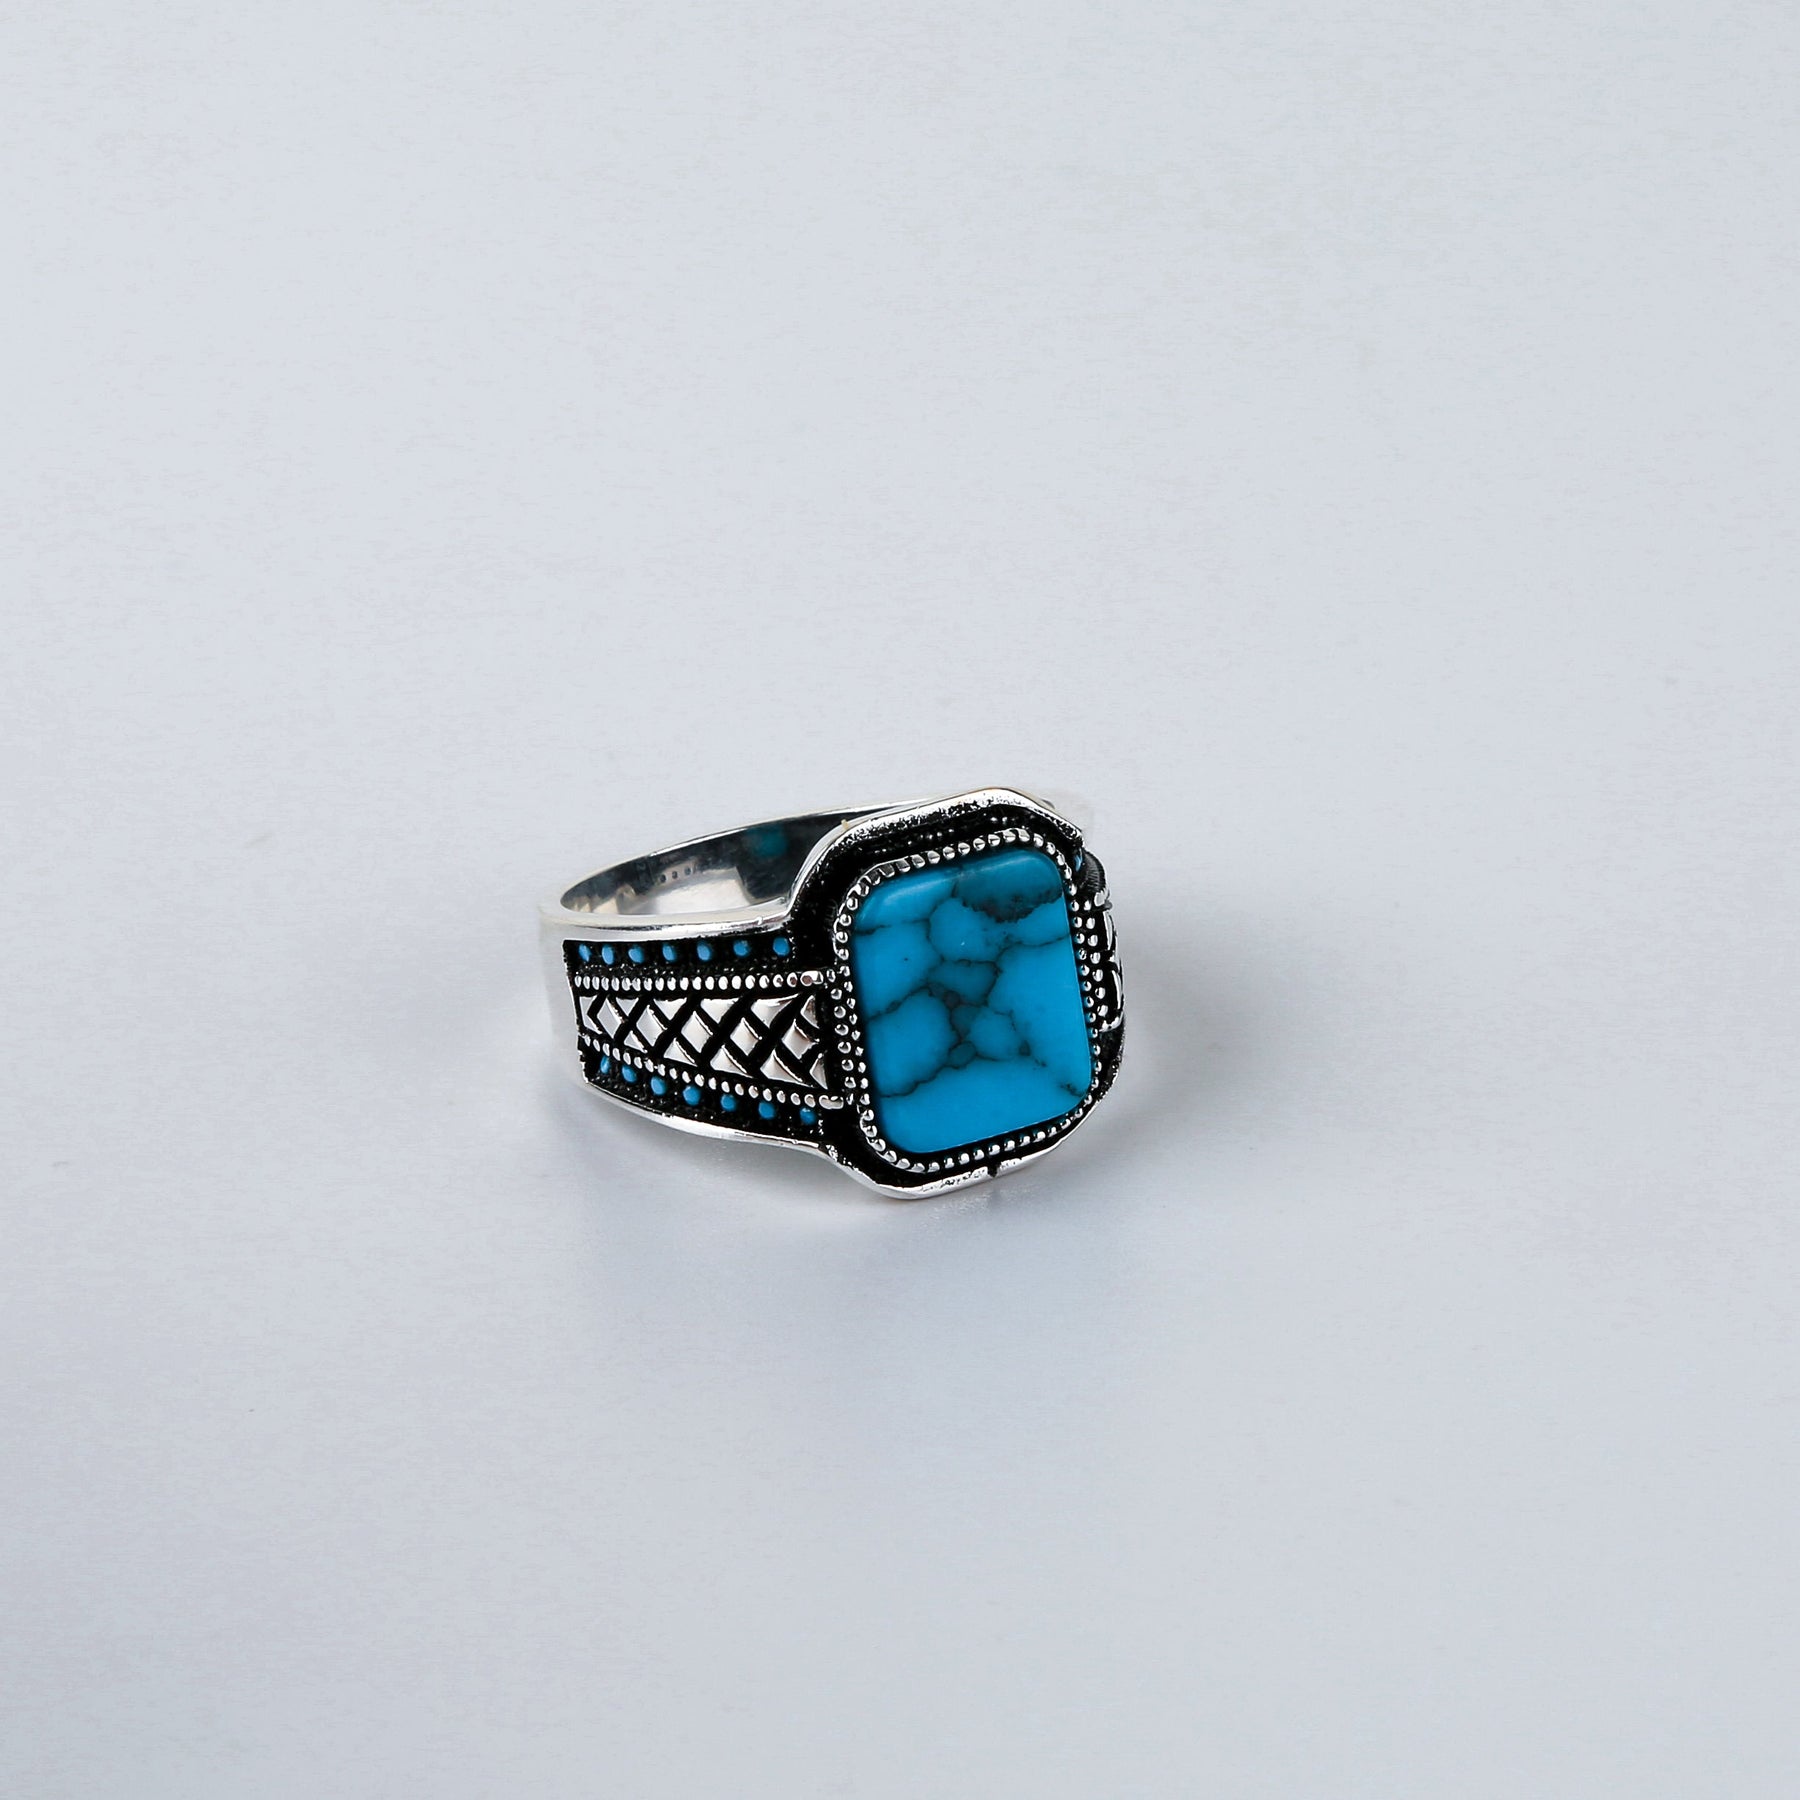 The Soft-edge Rectangle Turquoise Criss-cross Accent Ring